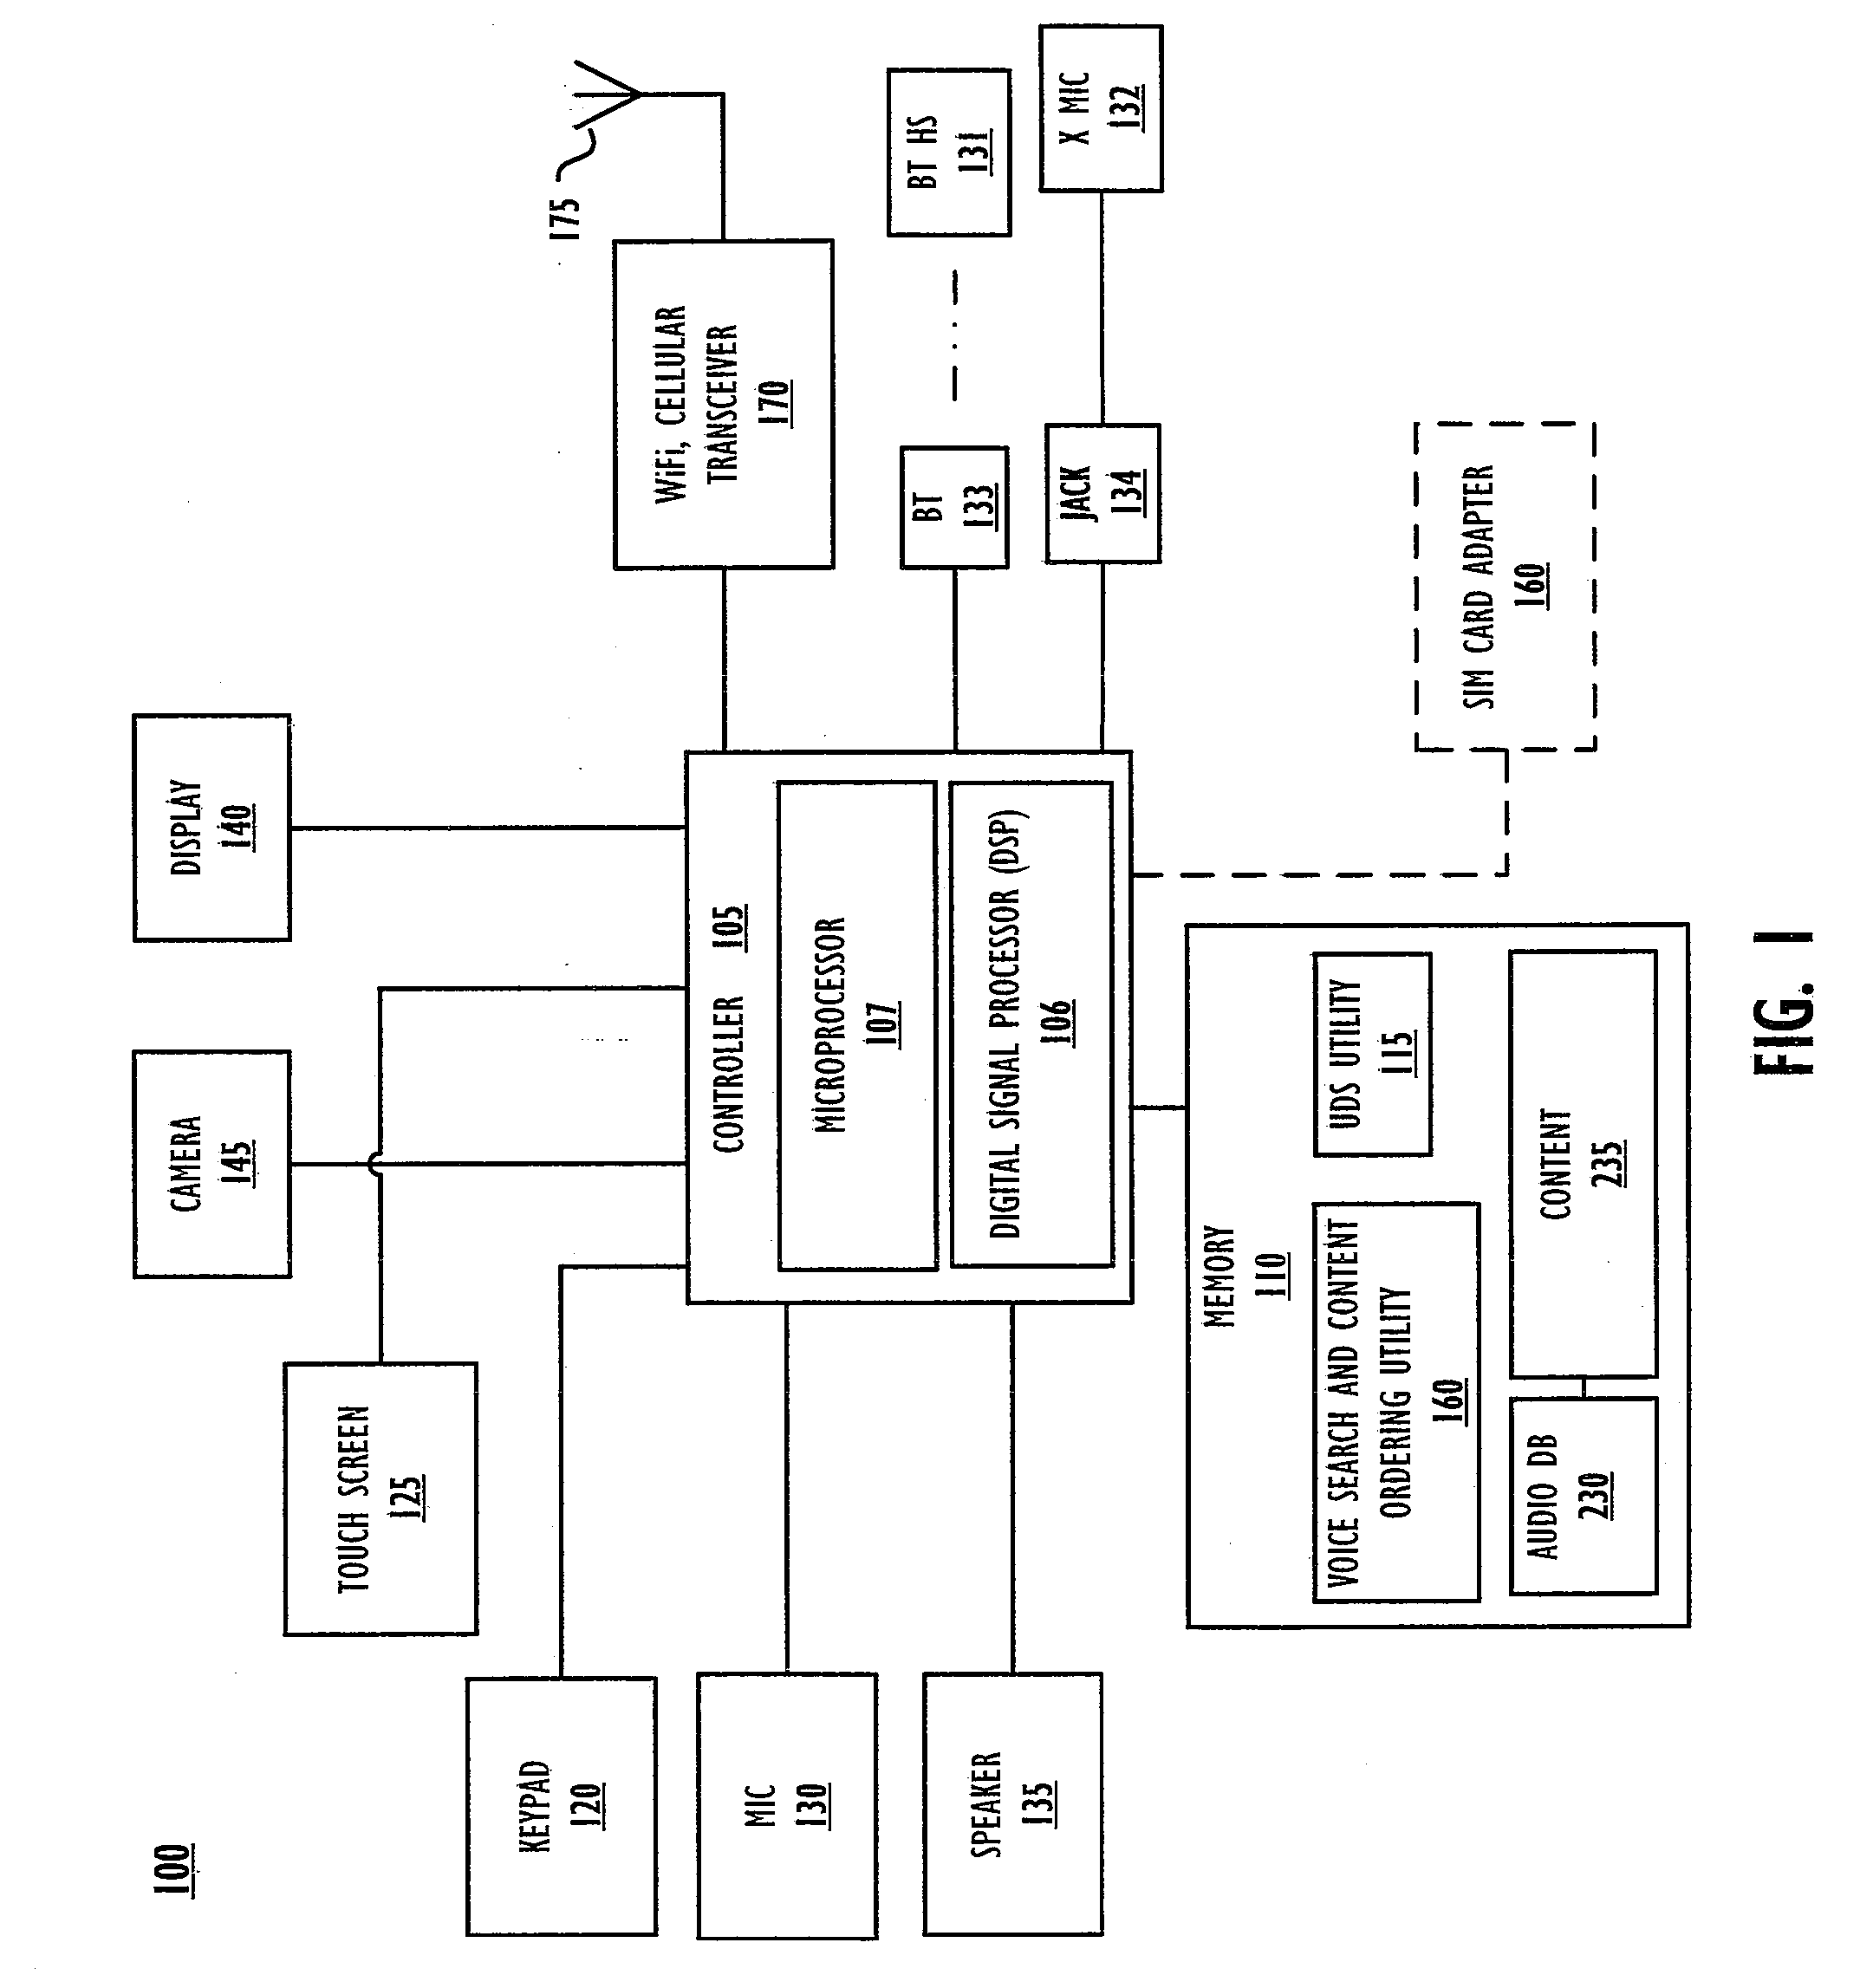 Method and Apparatus for Voice Searching for Stored Content Using Uniterm Discovery